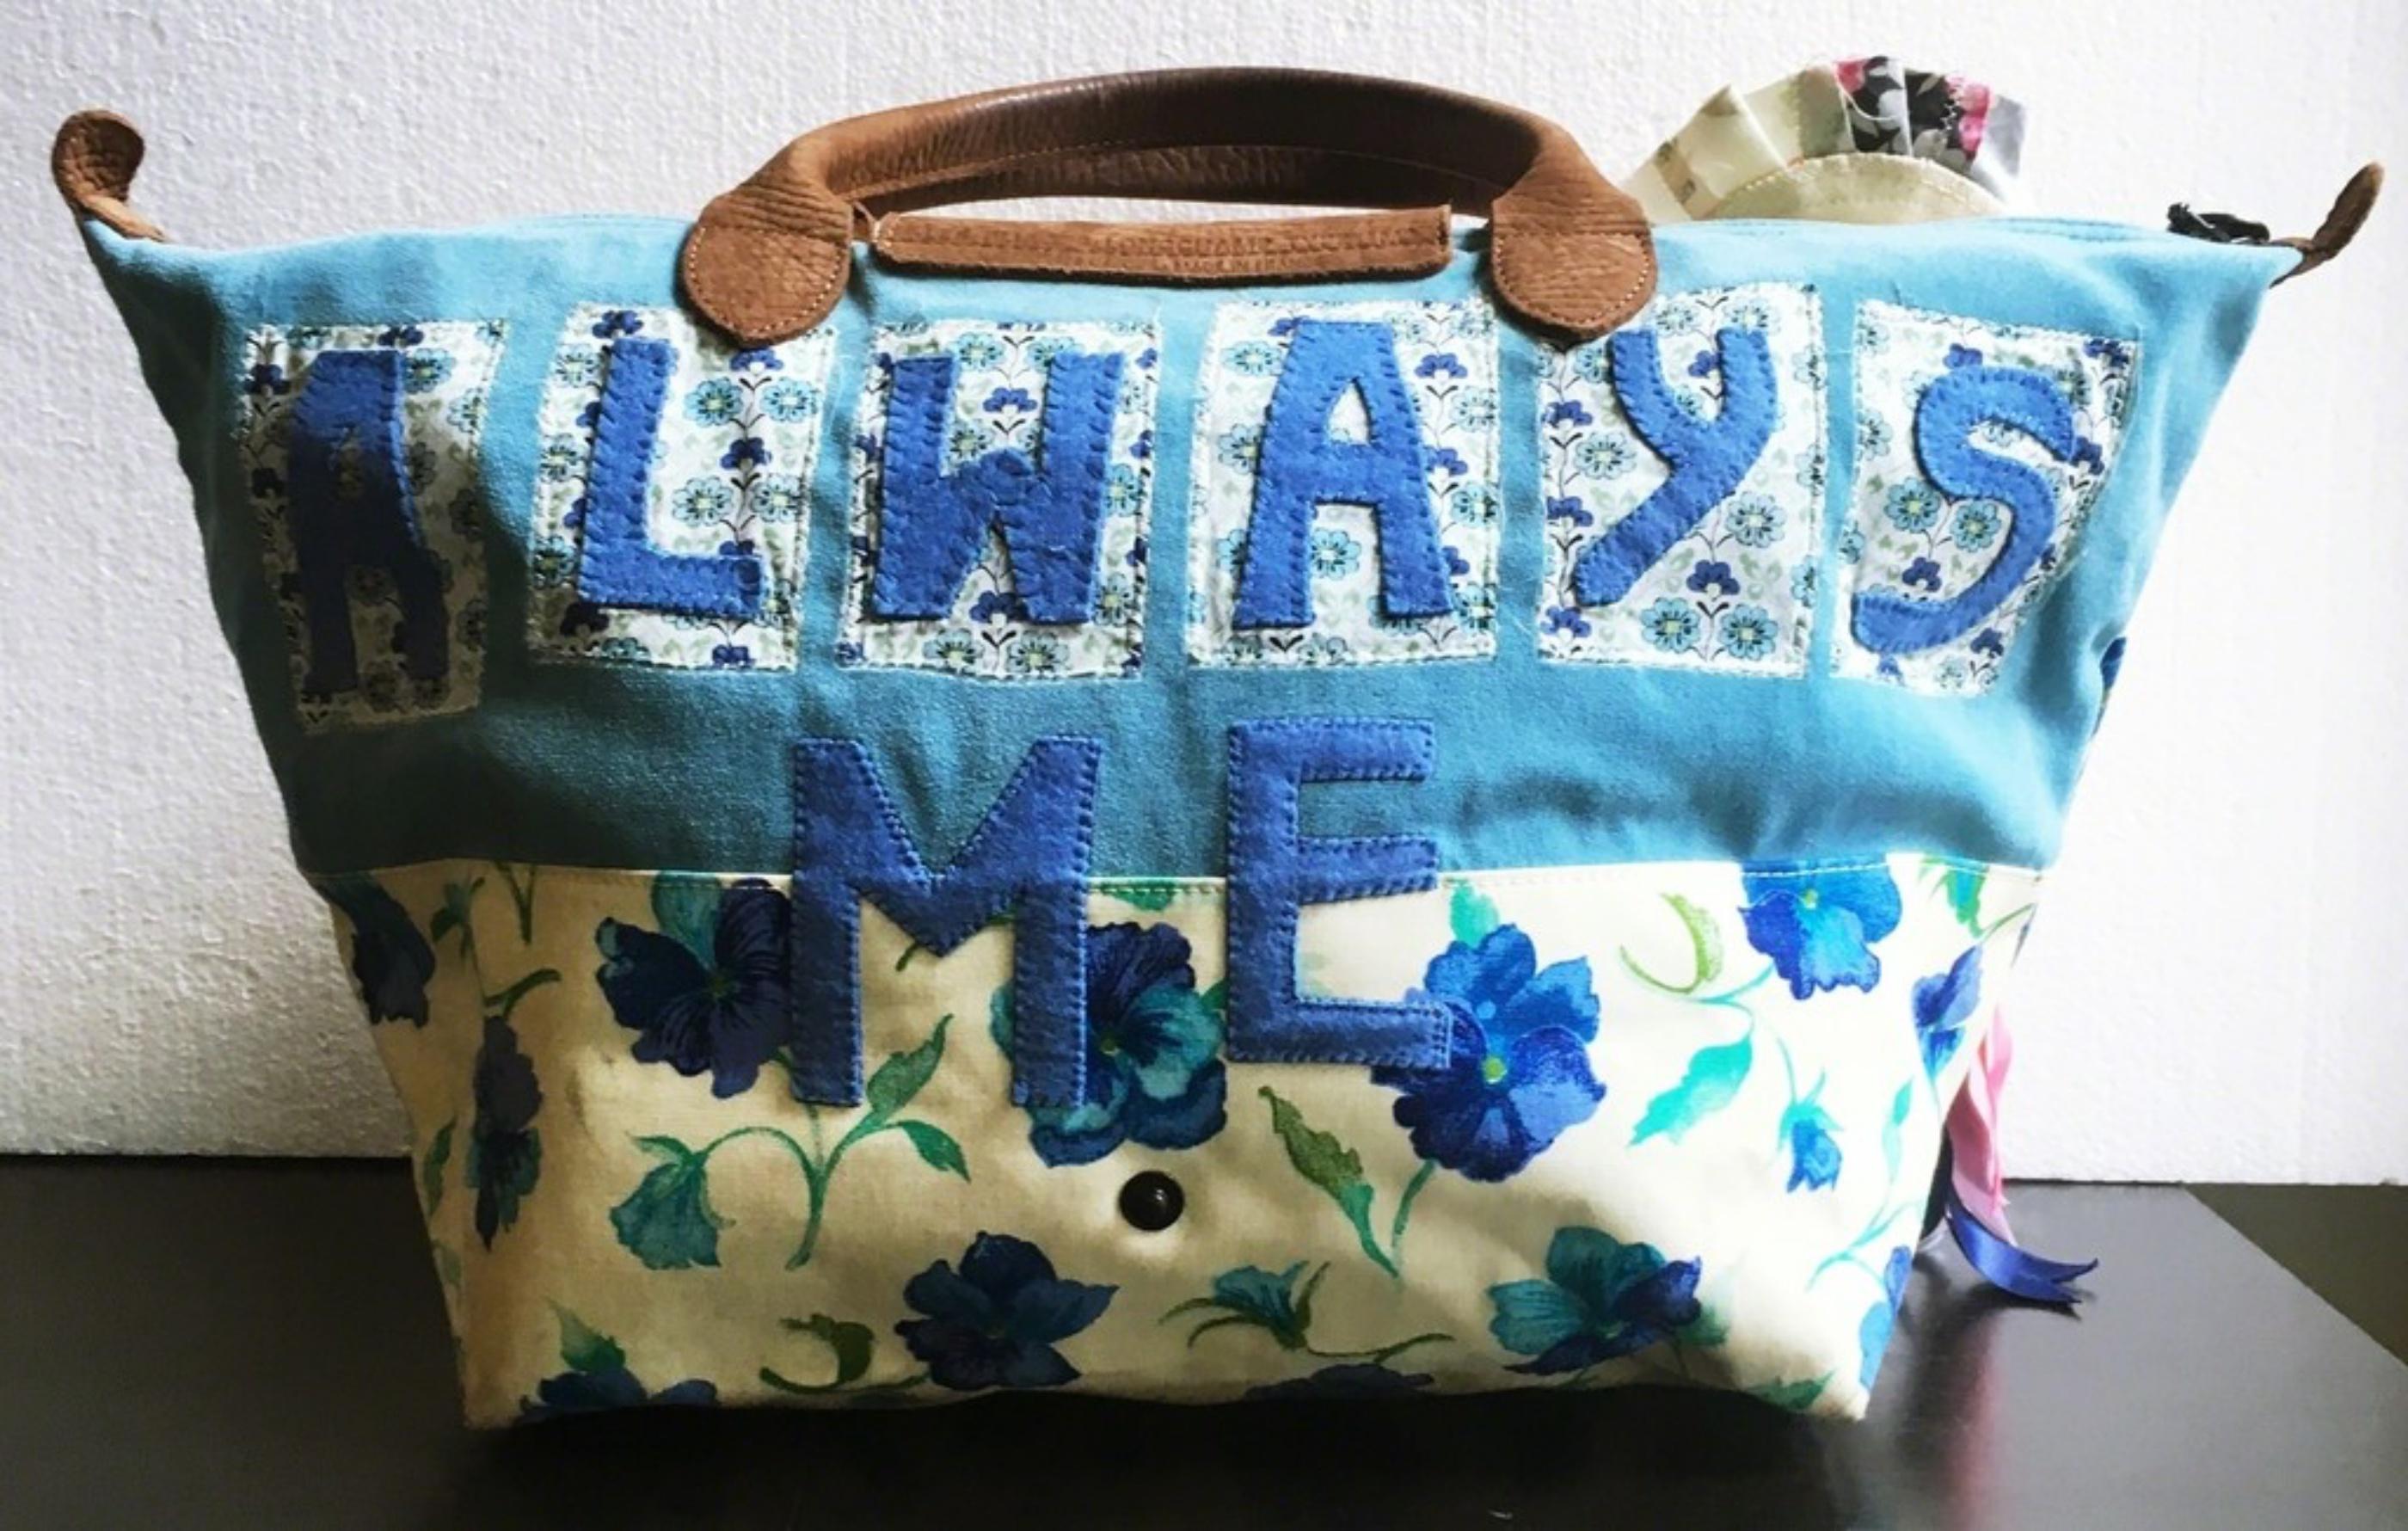 Always Me, limited edition handbag (Uniquely Hand signed & dated by Tracey Emin) For Sale 2